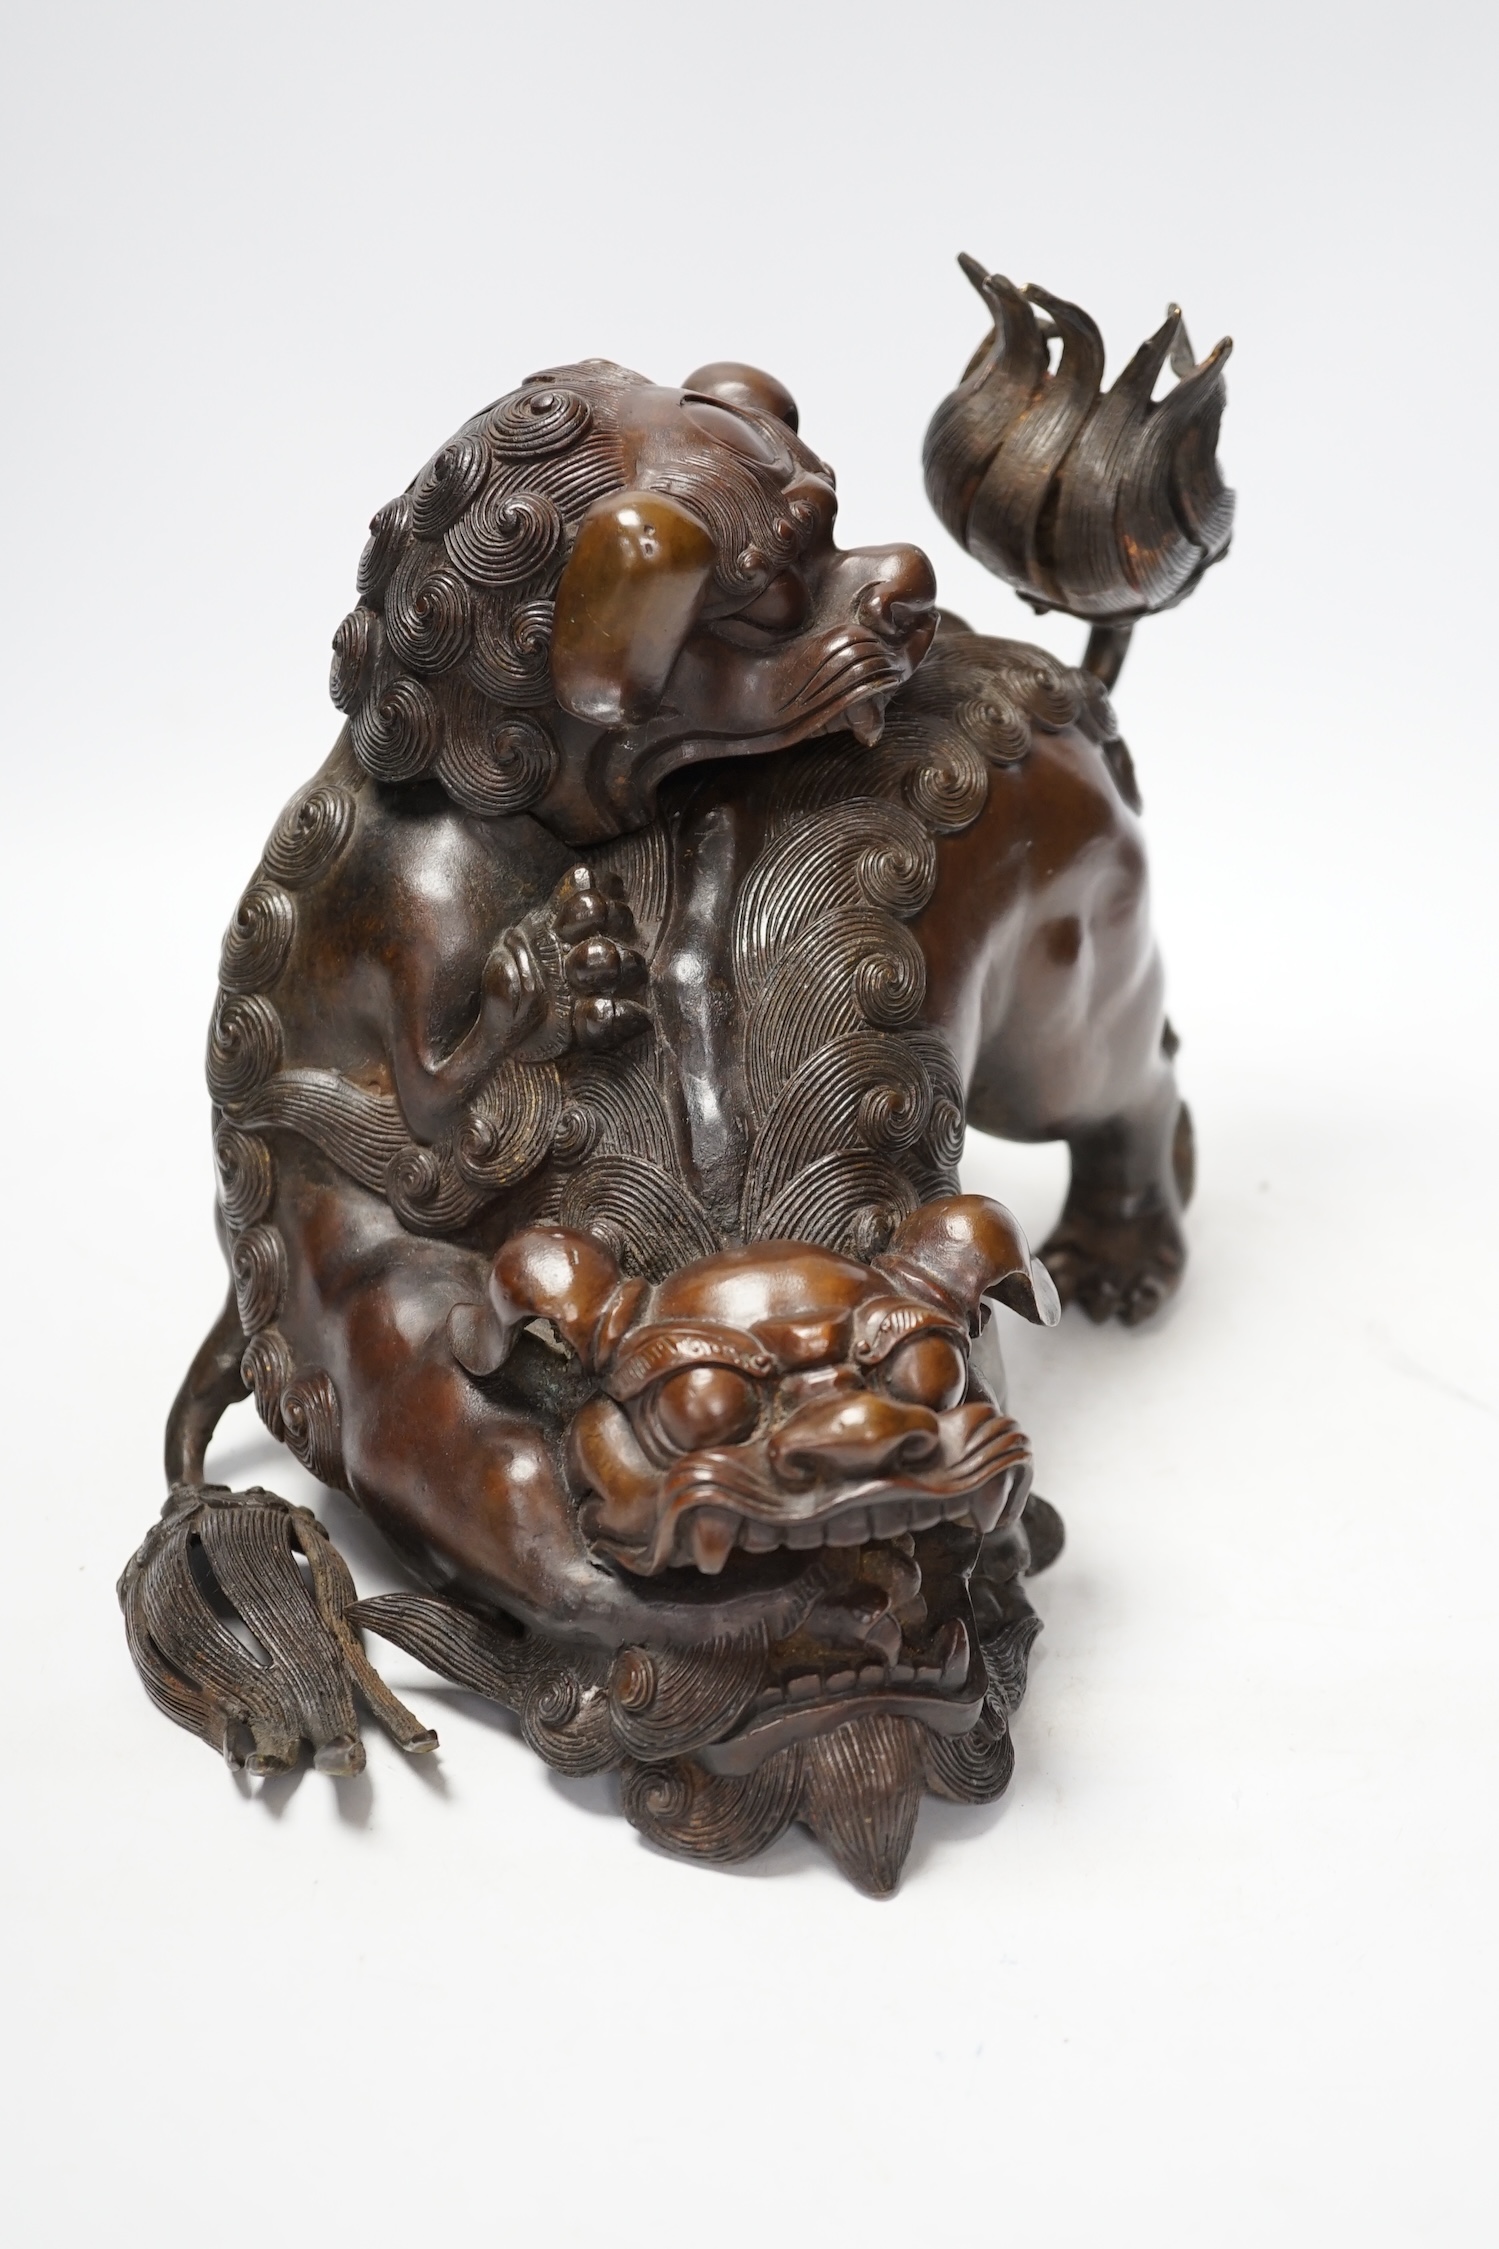 A large Chinese bronze incense burner, modelled as 2 lion dogs playing, 19th century, 22cm high. Condition - good